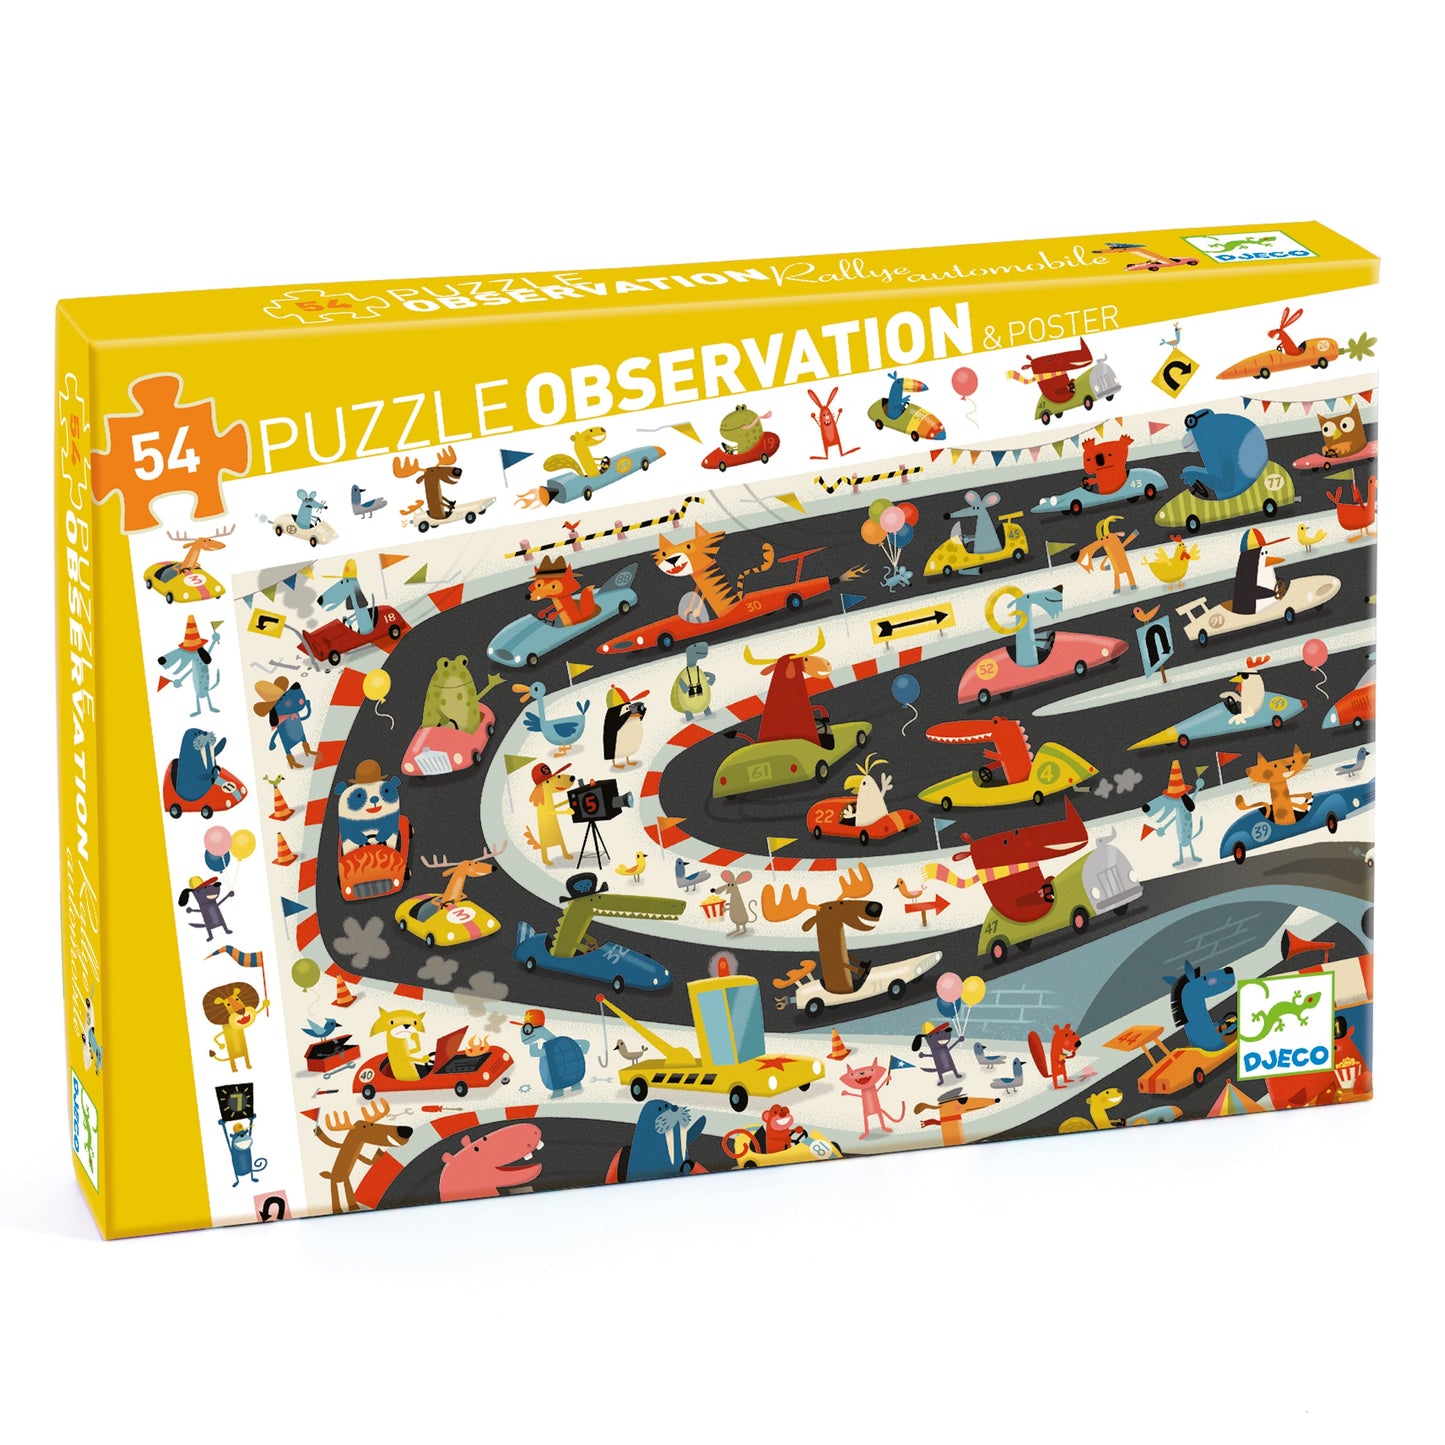 Automobile Rally 54pc Observation Jigsaw Puzzle + Poster